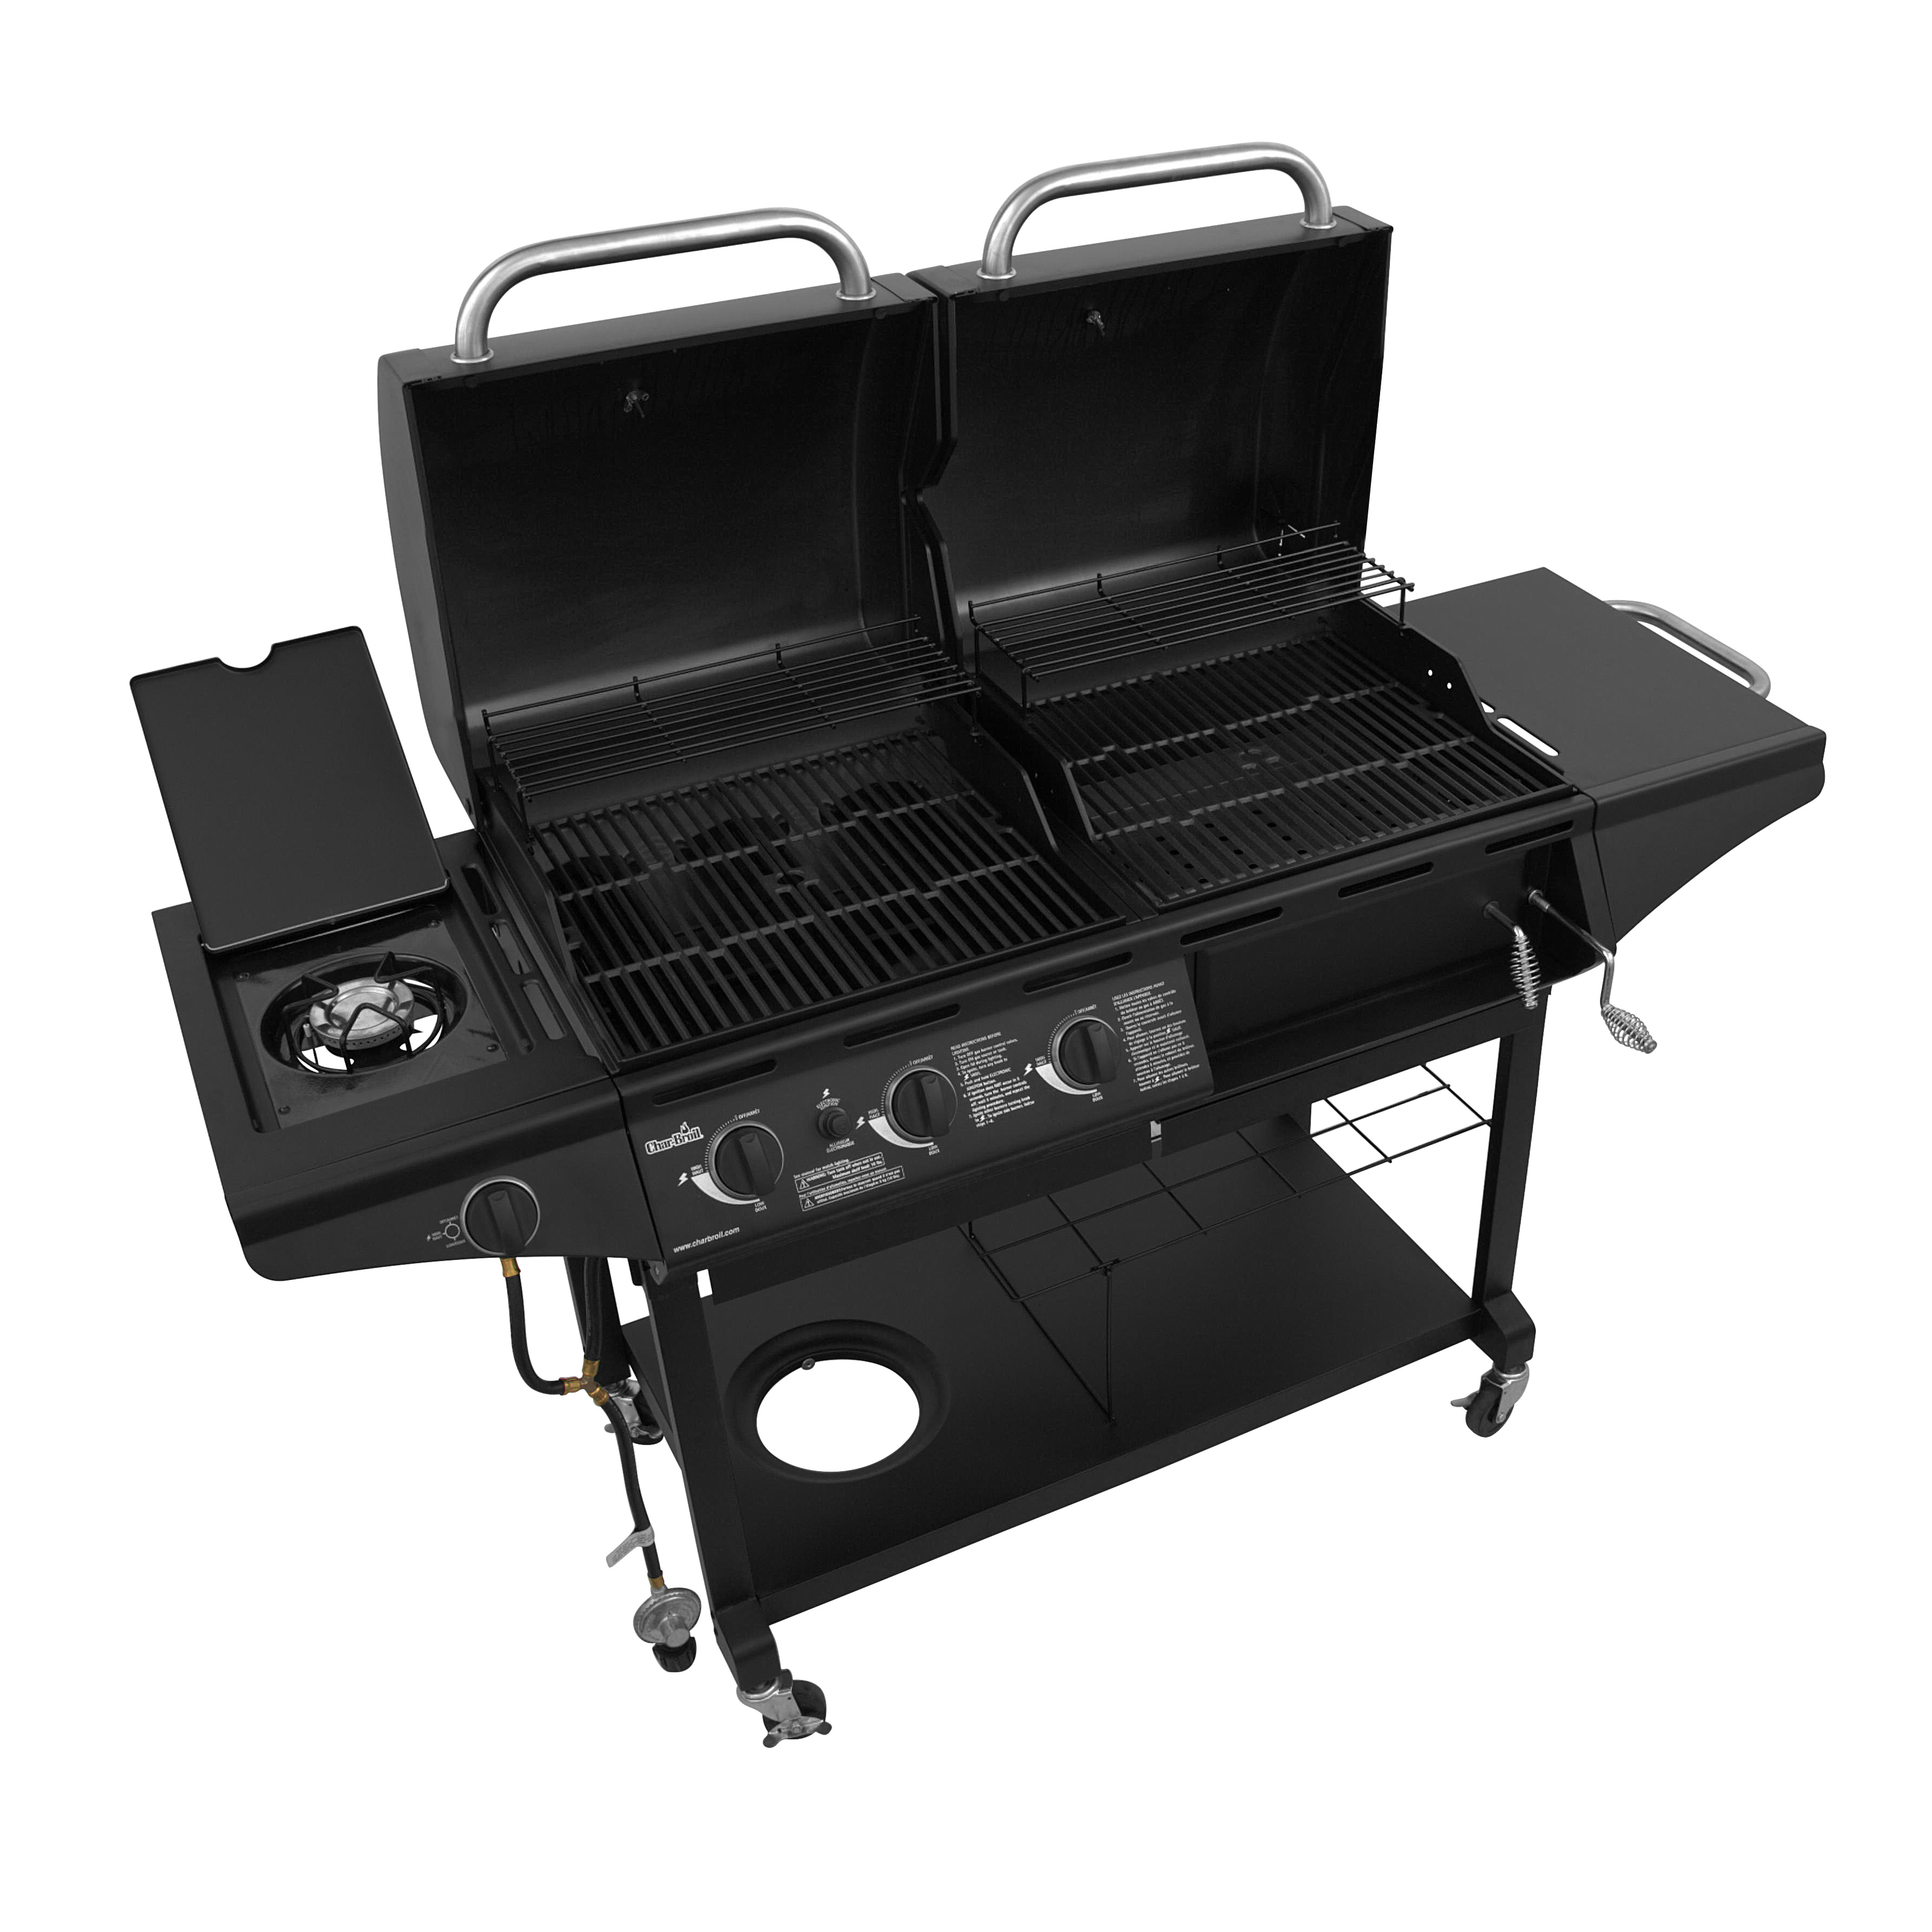 Char-Broil Deluxe Charcoal & Gas Combination Cart Grill - image 3 of 8